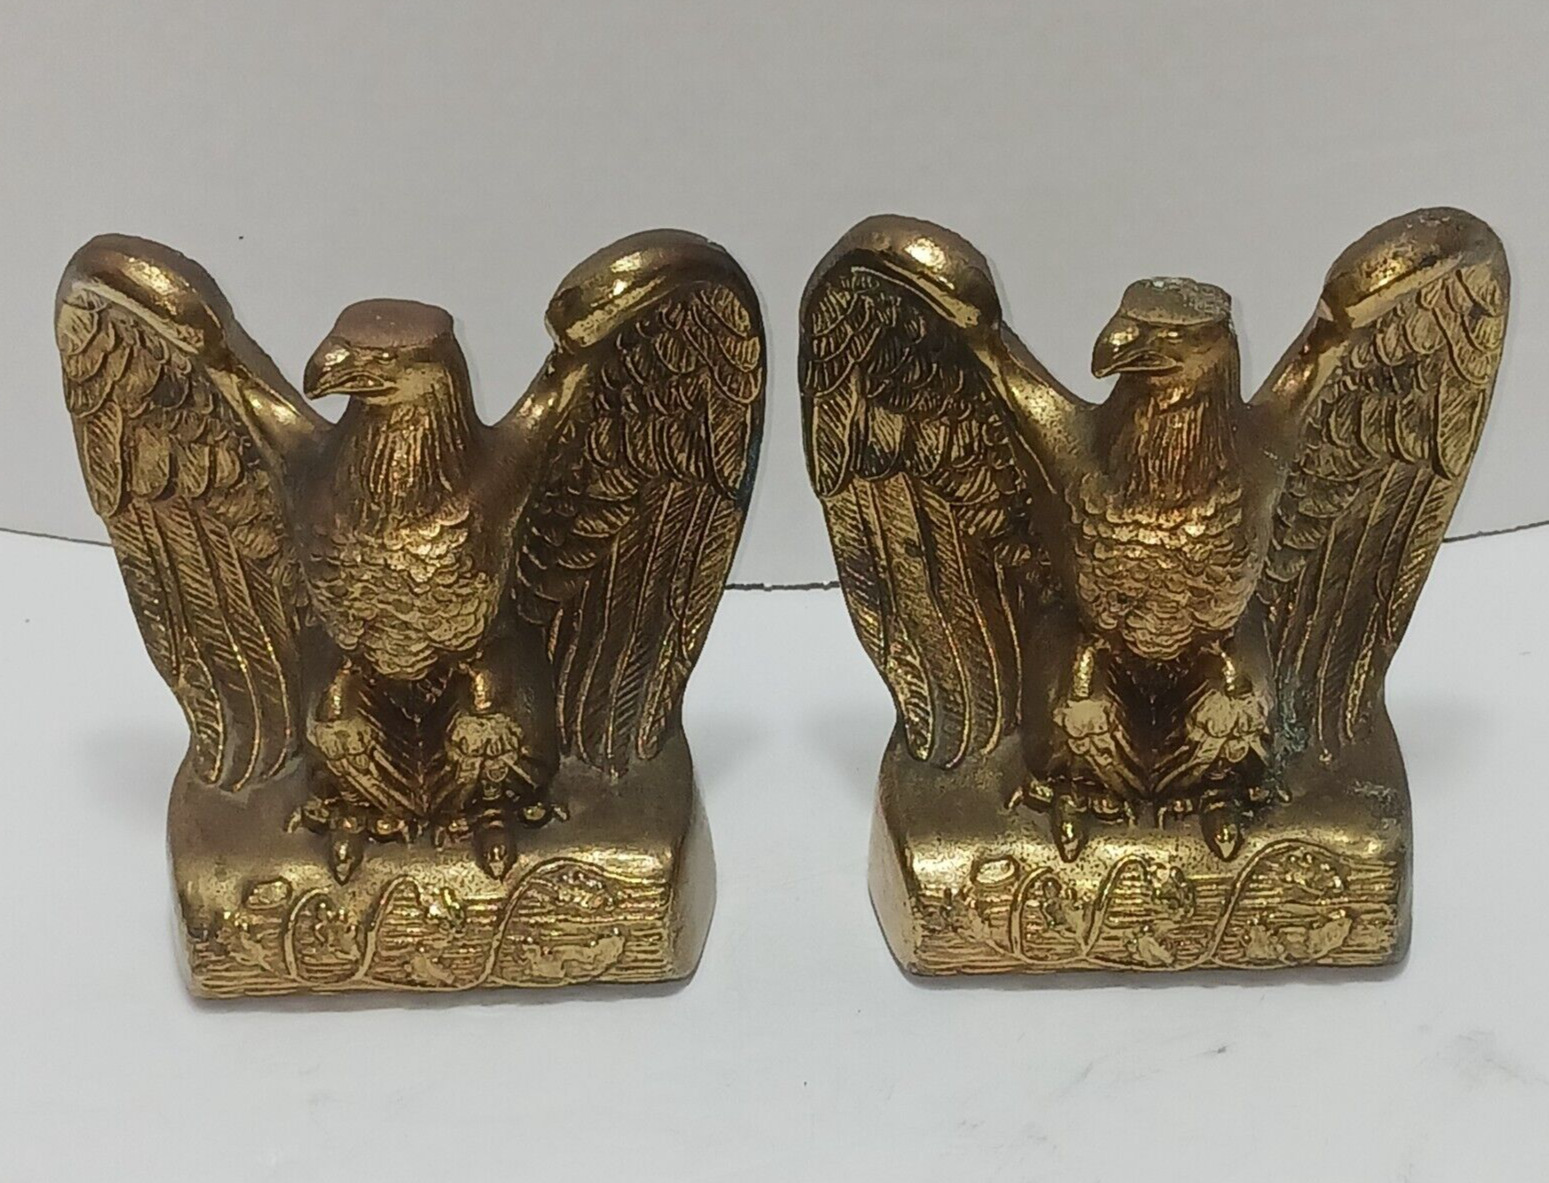 VTG Gold American Eagle Bookends Mid-Century MCM, brass color?